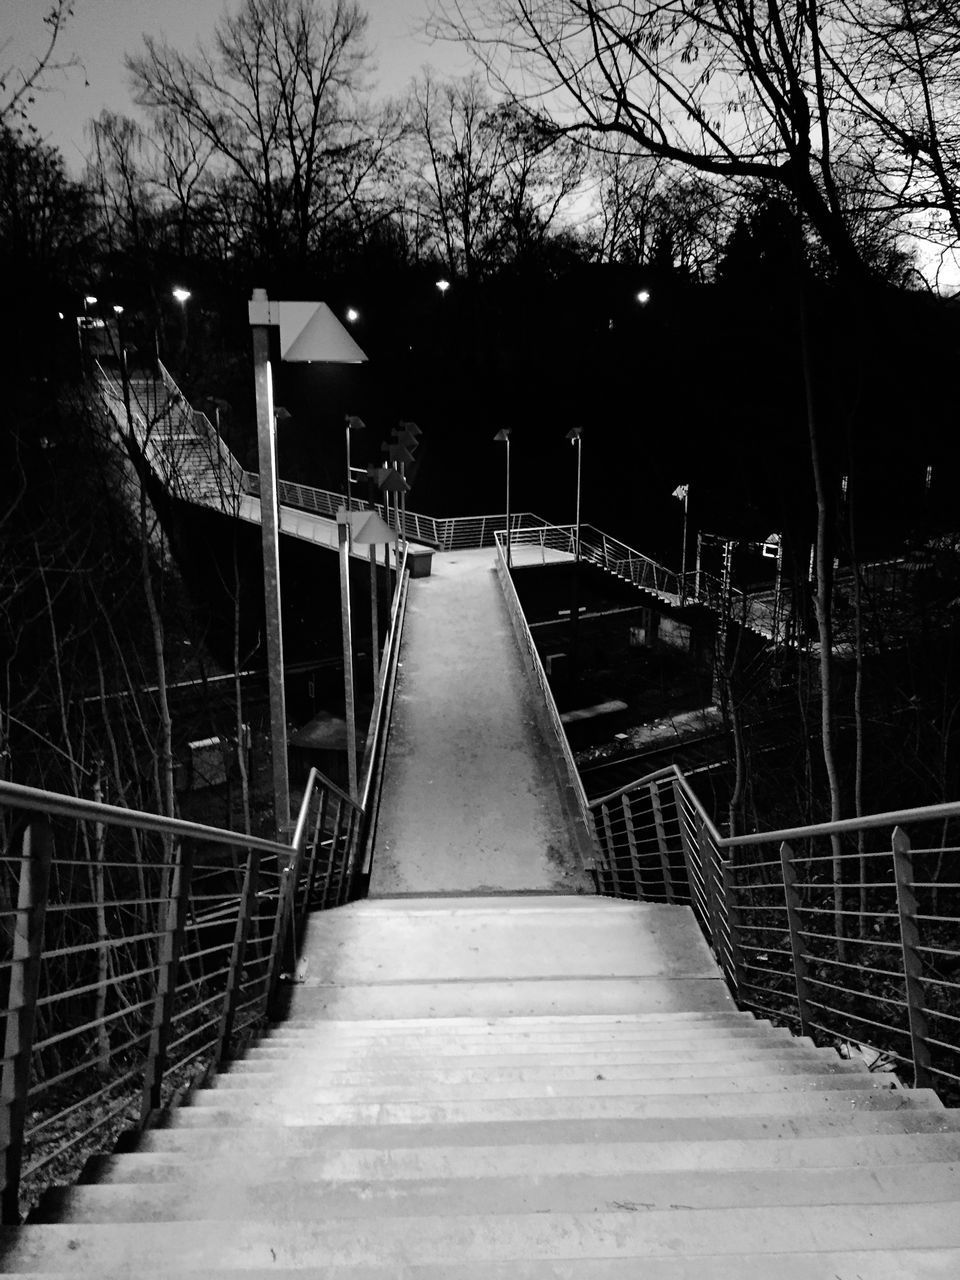 railing, the way forward, tree, built structure, footbridge, architecture, steps, diminishing perspective, bare tree, steps and staircases, bridge - man made structure, connection, staircase, walkway, vanishing point, wood - material, outdoors, branch, metal, day